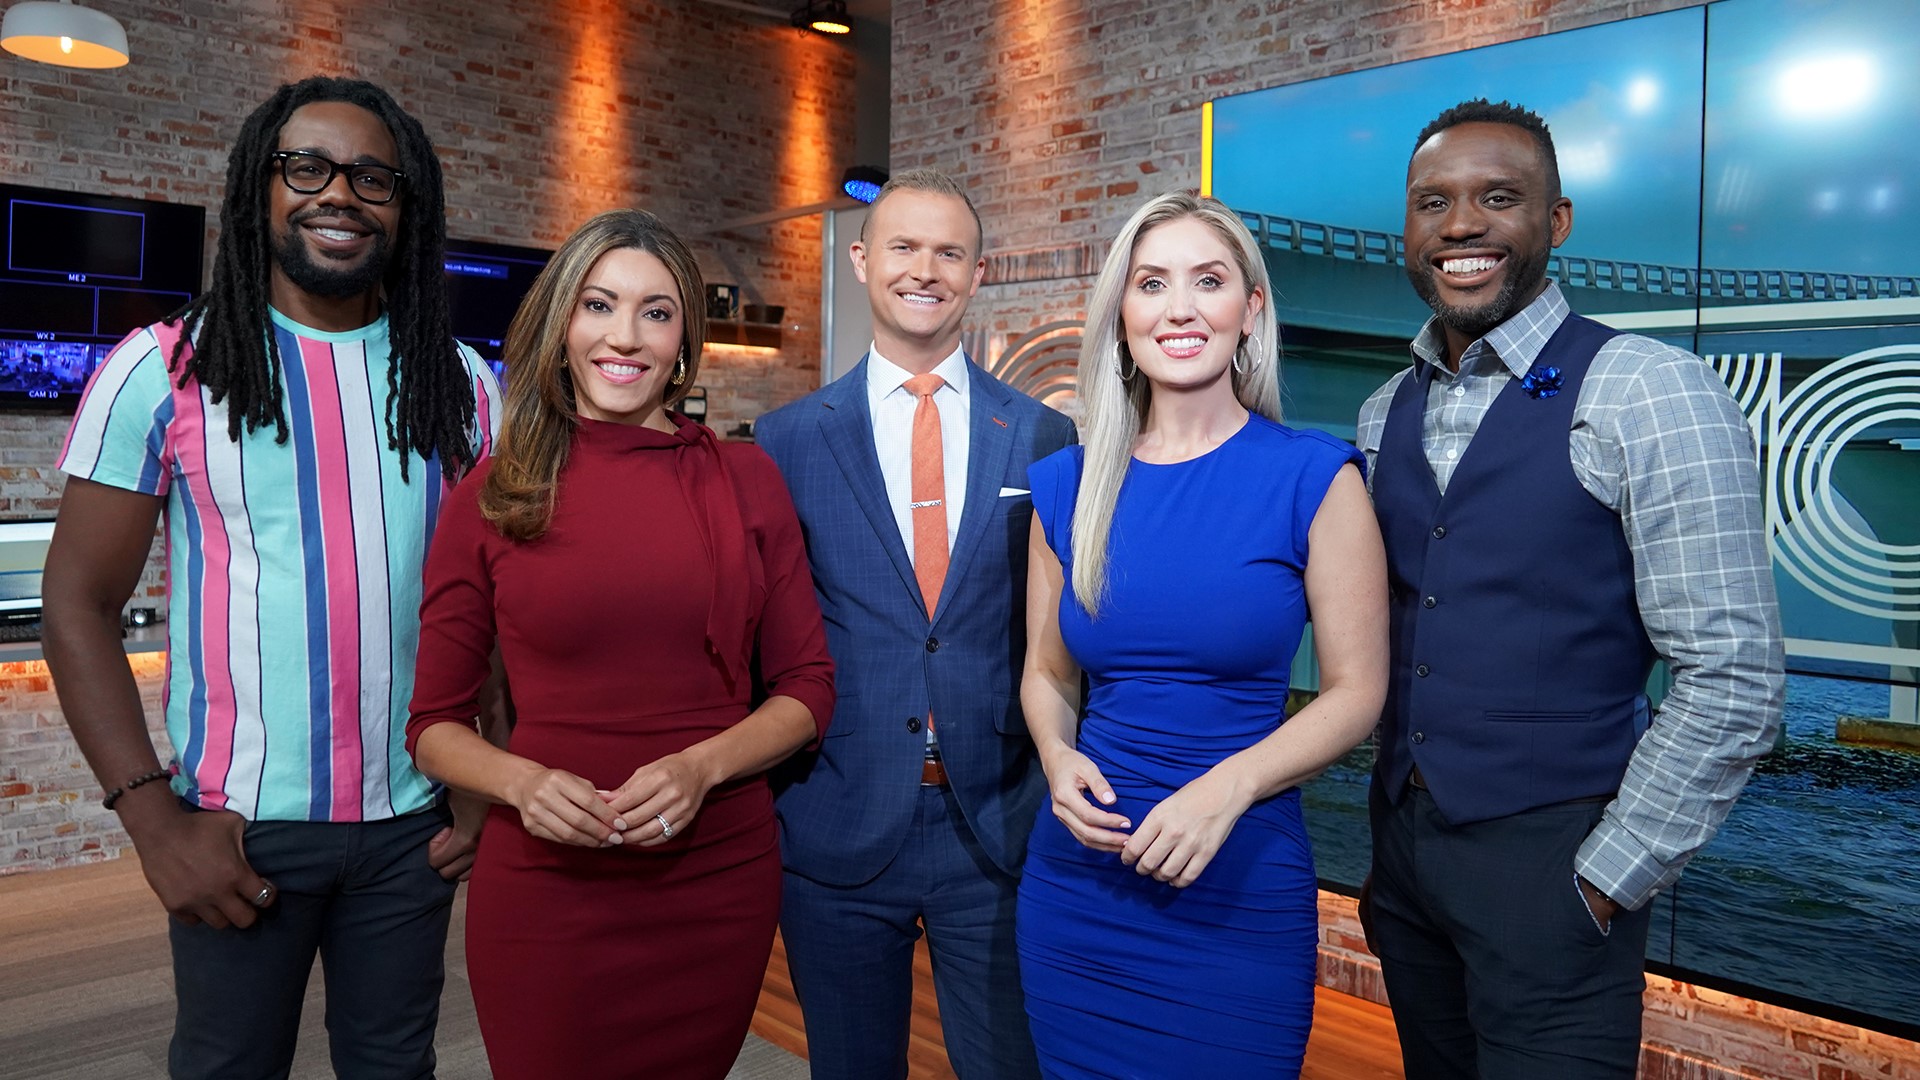 The AM crew gets your morning started off right, offering breaking news and traffic alerts to plan your commute. Plus, we've got the forecast to start your day.